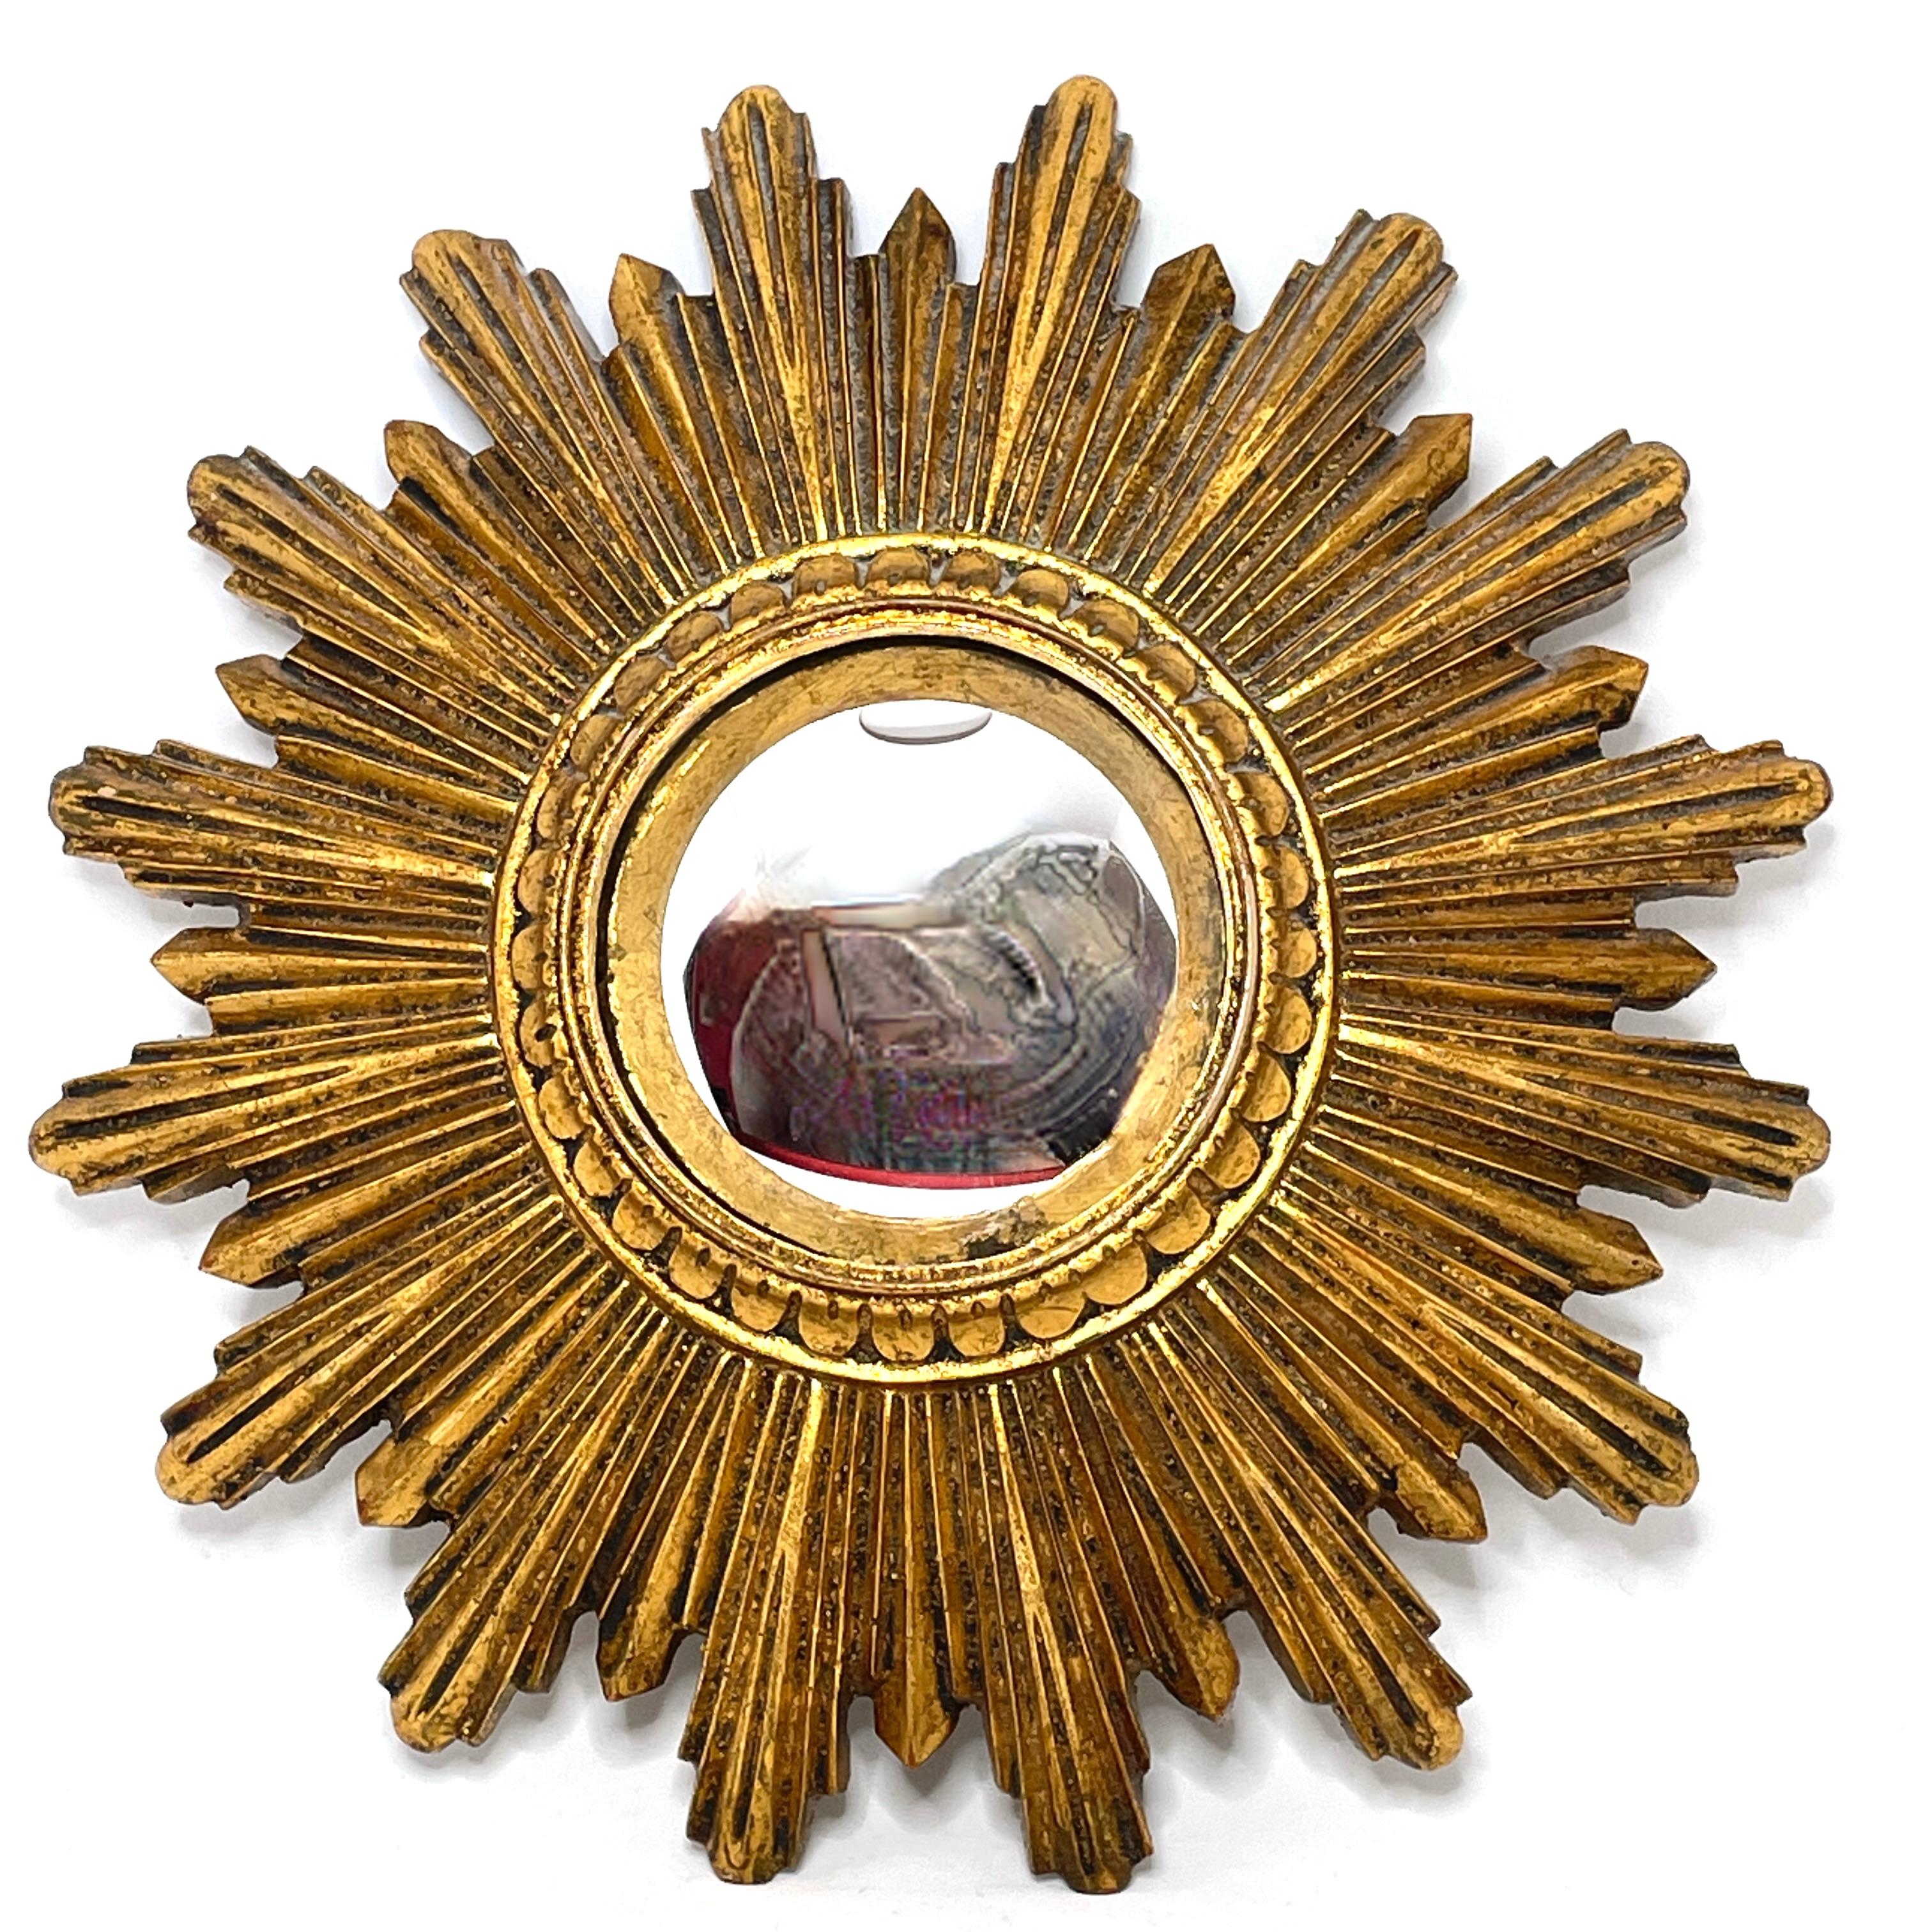 A cute sunburst or starburst mirror. Made of gilded composition. It measures approximate: 8 7/8